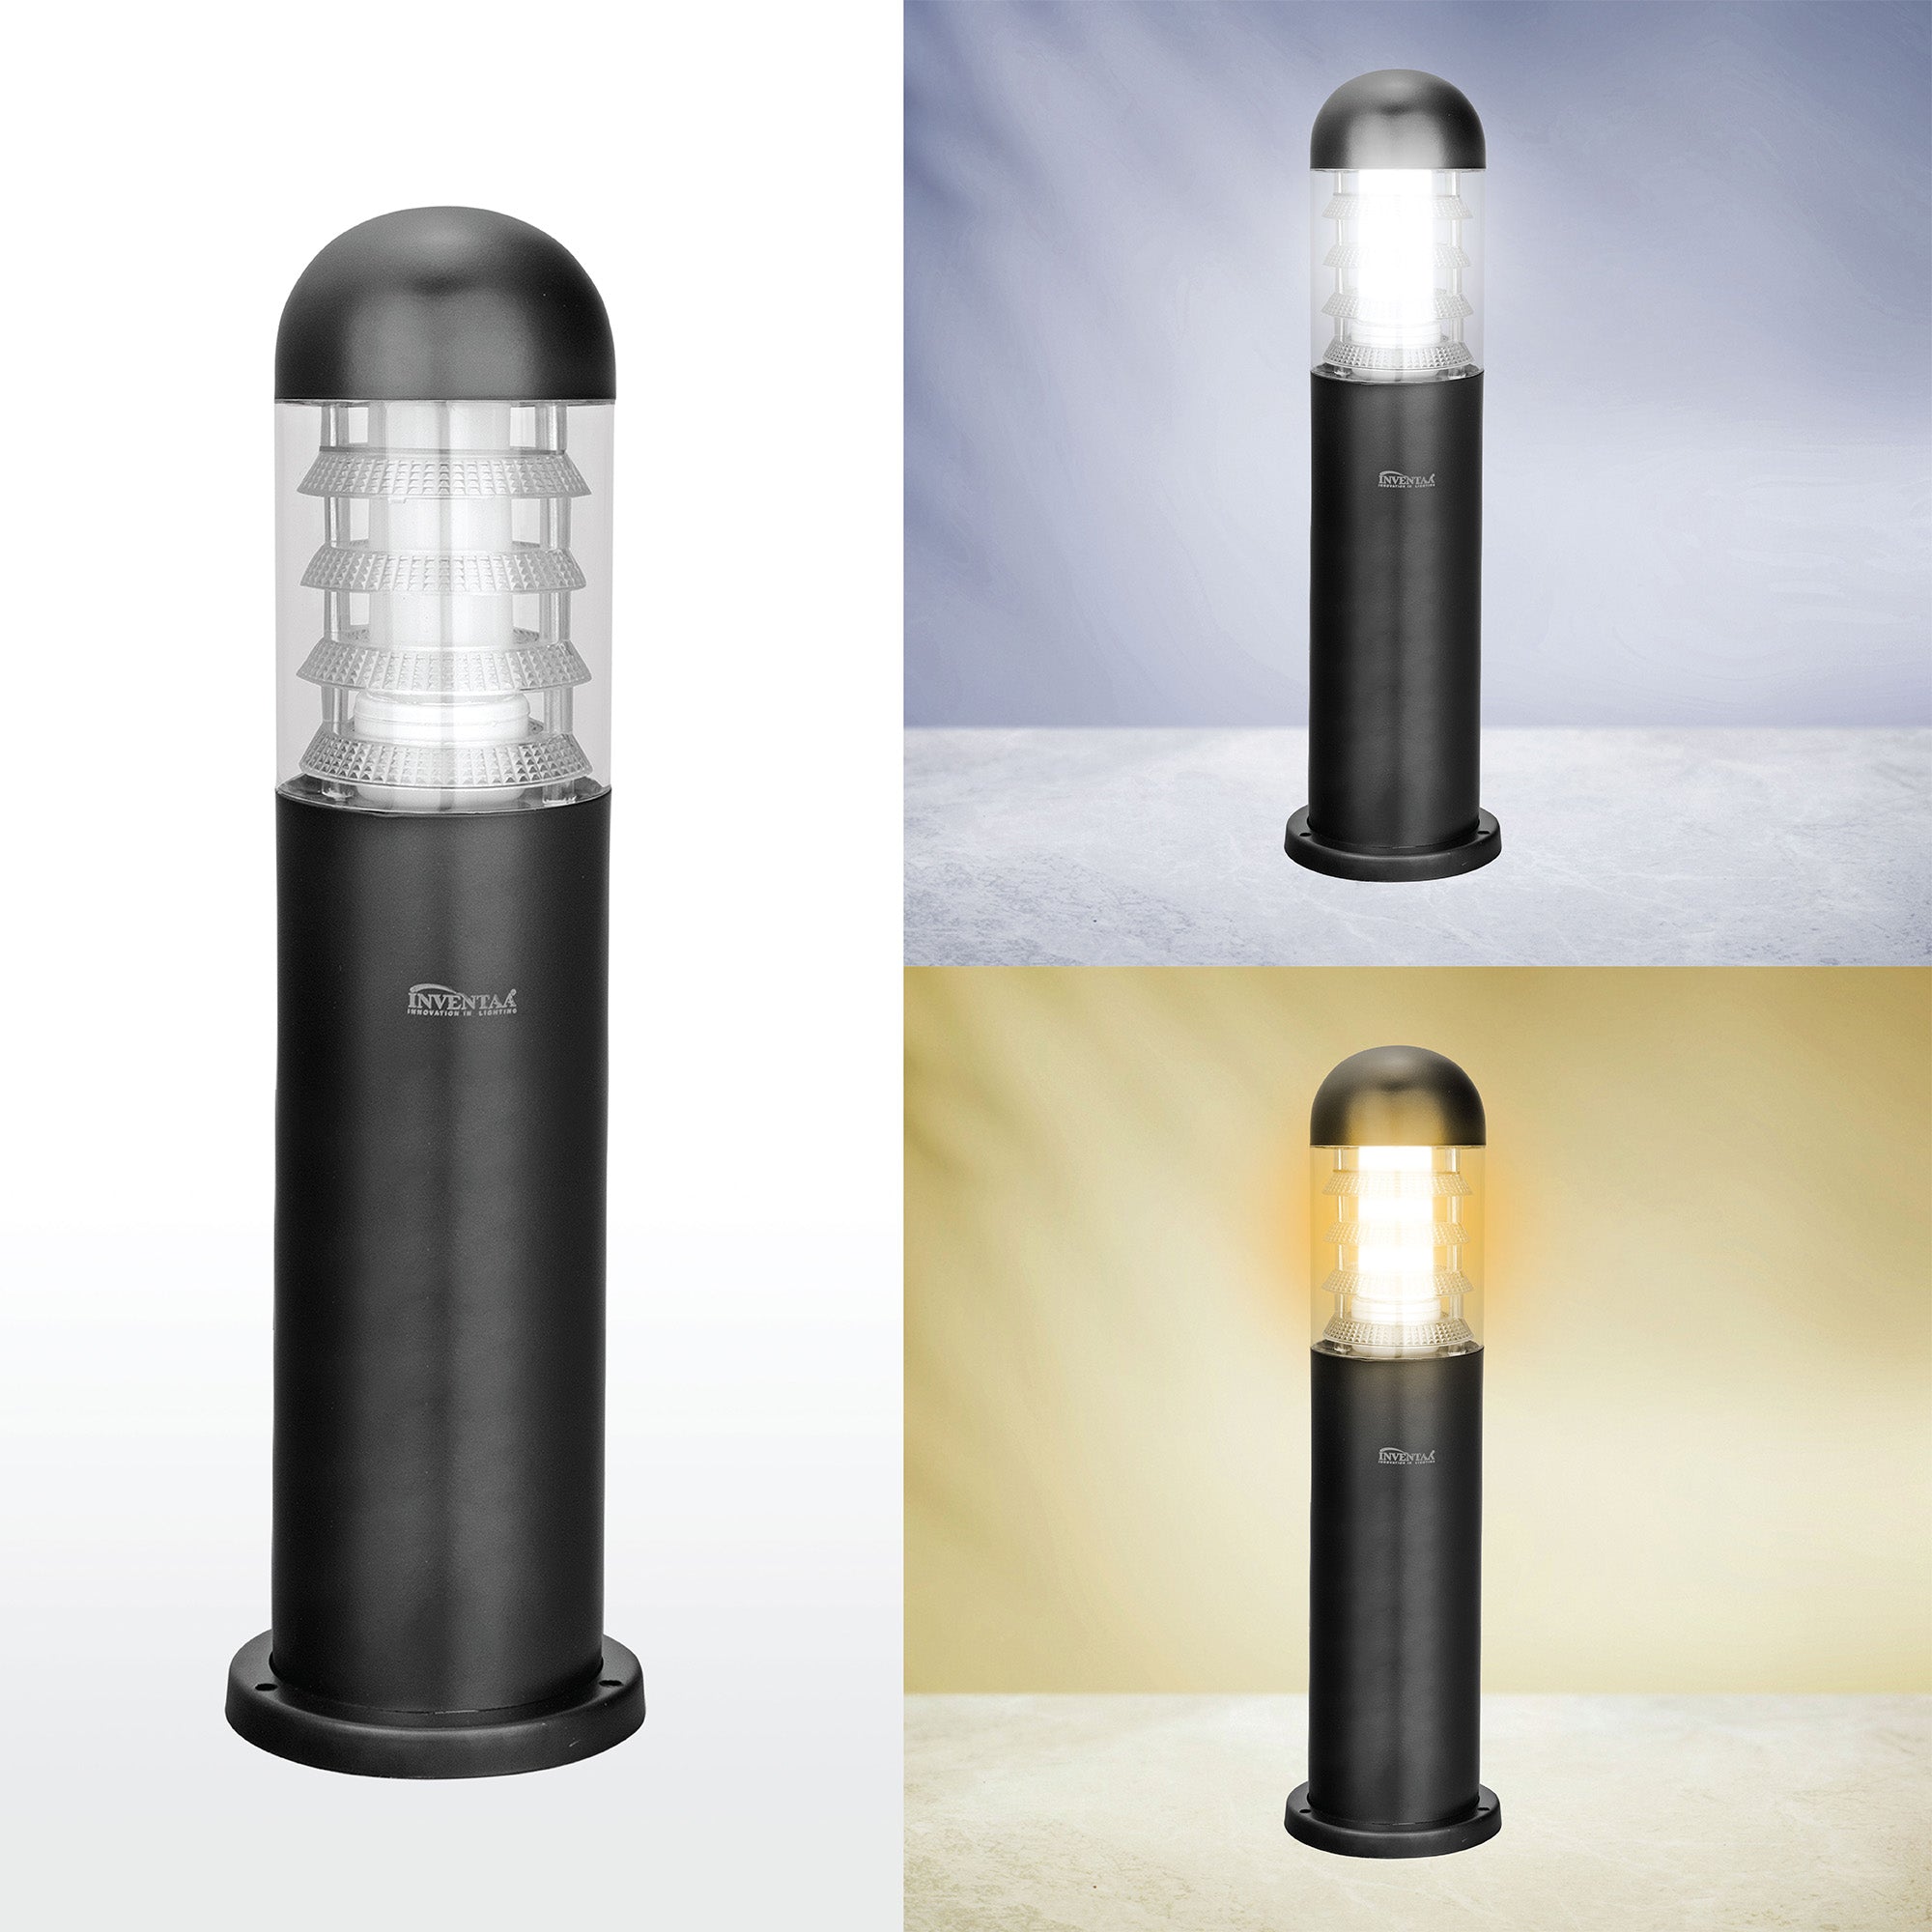 Cool and warm white comparison of Electra 2 feet led garden bollard light #size_2 feet